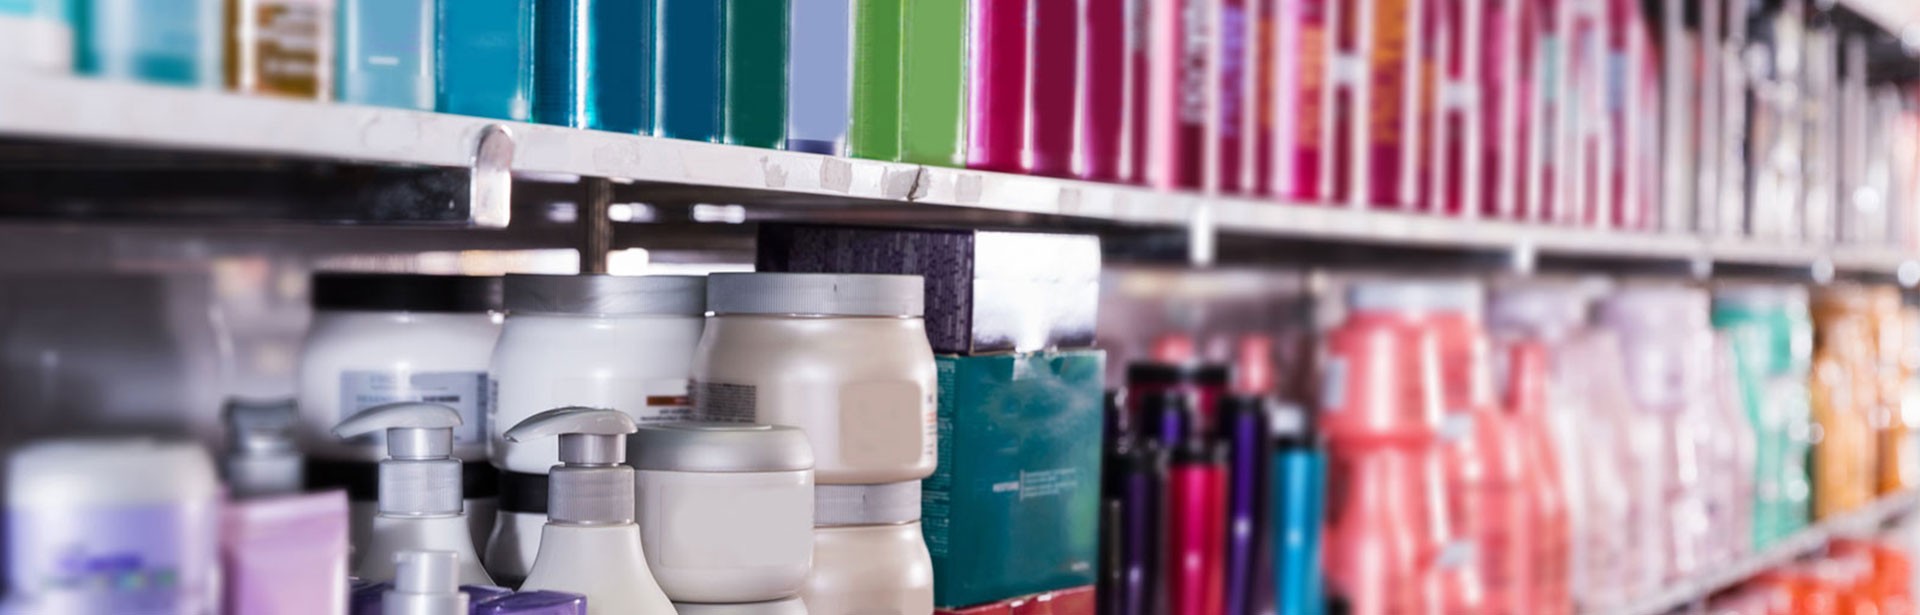 Close-up on a shelf of cosmetic products